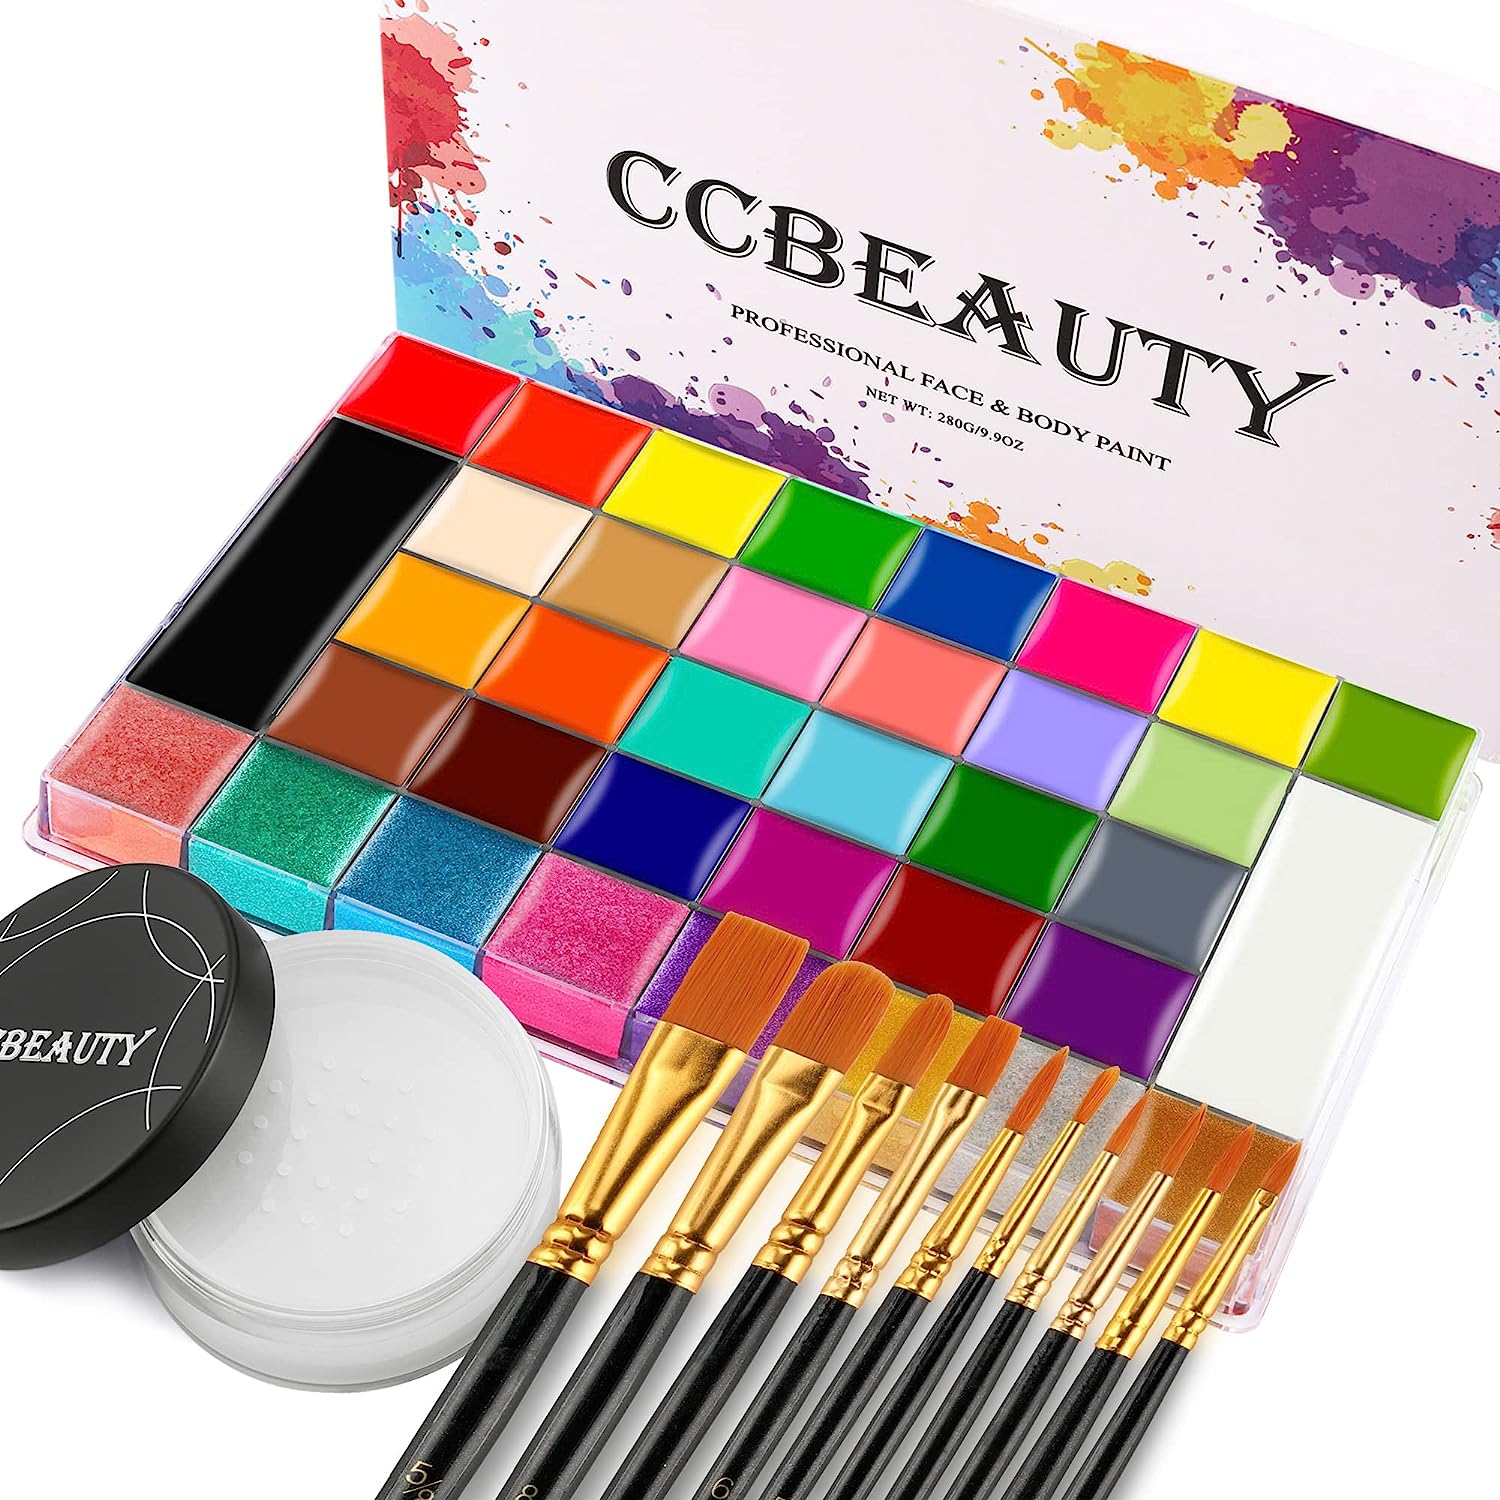 CCbeauty 36 Colors Face Body Paint Oil Based, Safe [...]